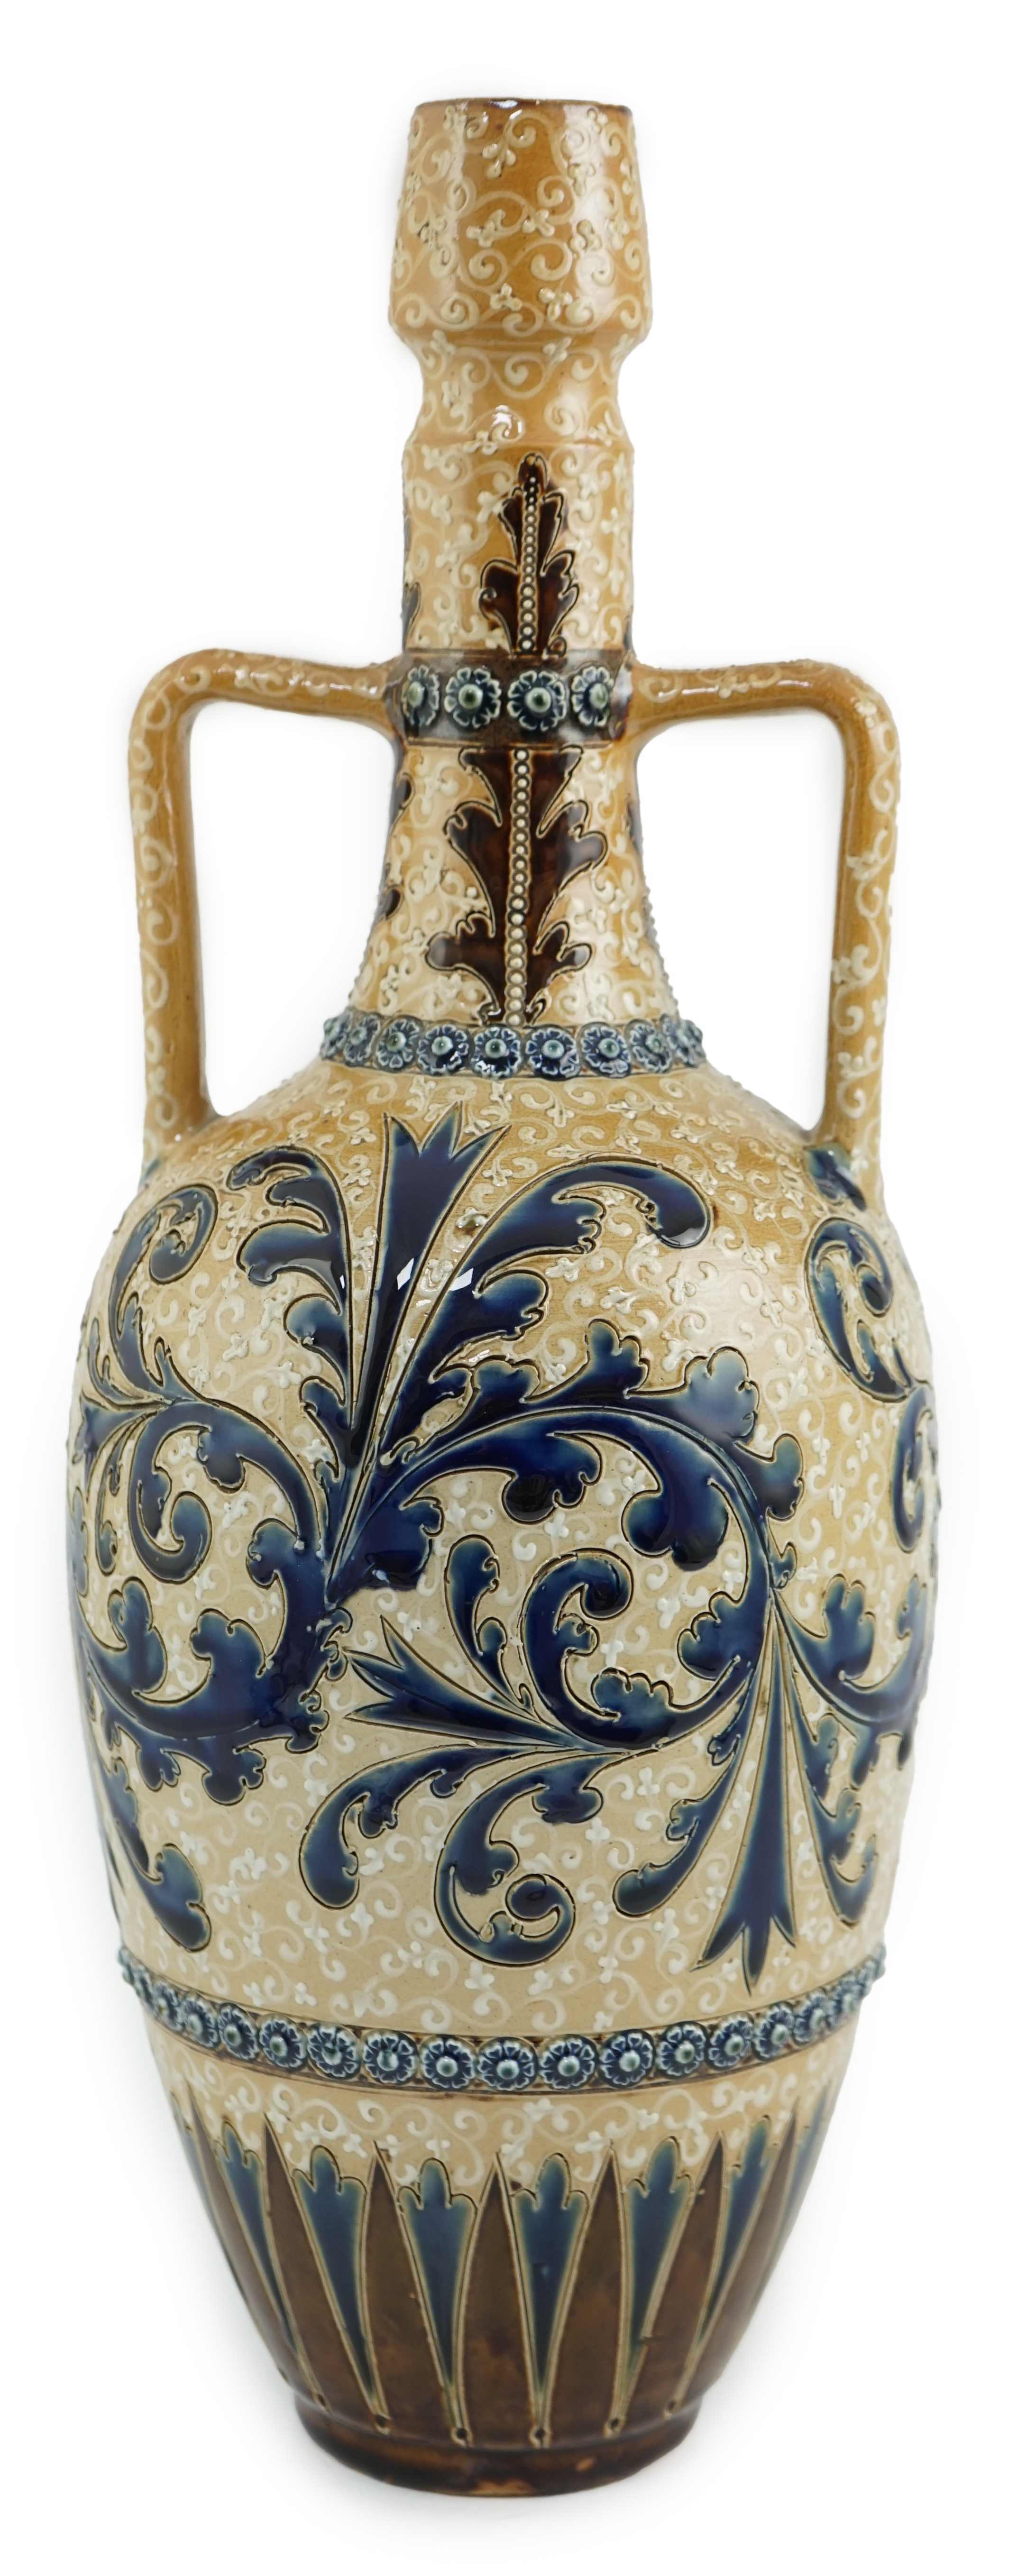 George Tinworth for Doulton Lambeth, a large stoneware vase, with scrolling blue foliate decoration, monogrammed and dated 1884, 40cm high. Condition - good